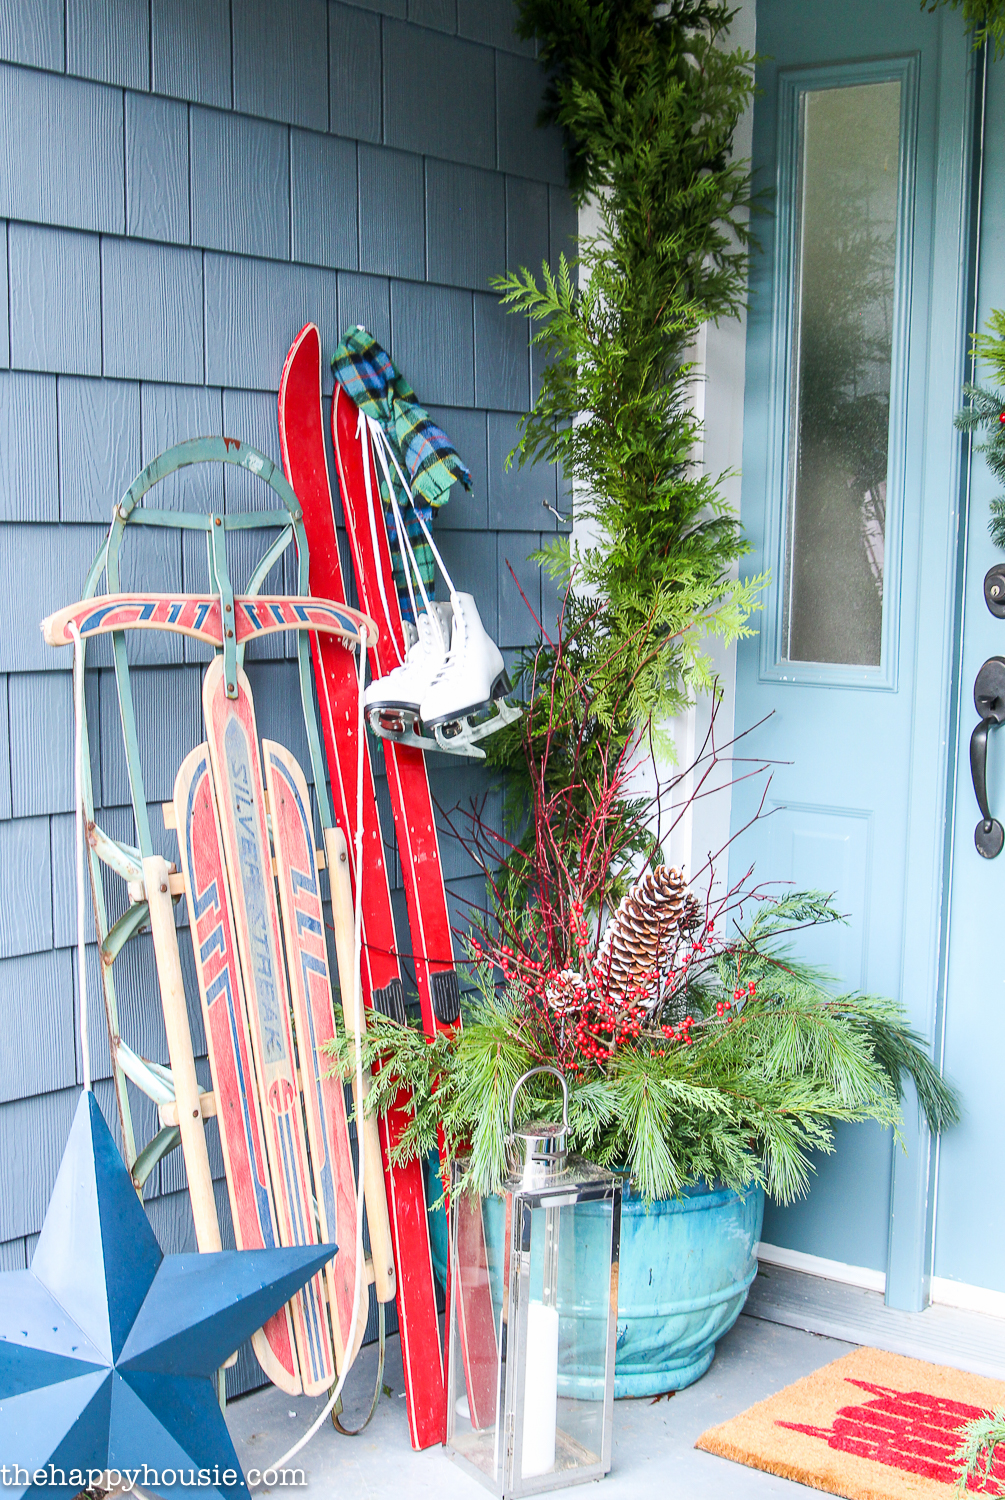 A sled, skis, and skates are all by the front door.